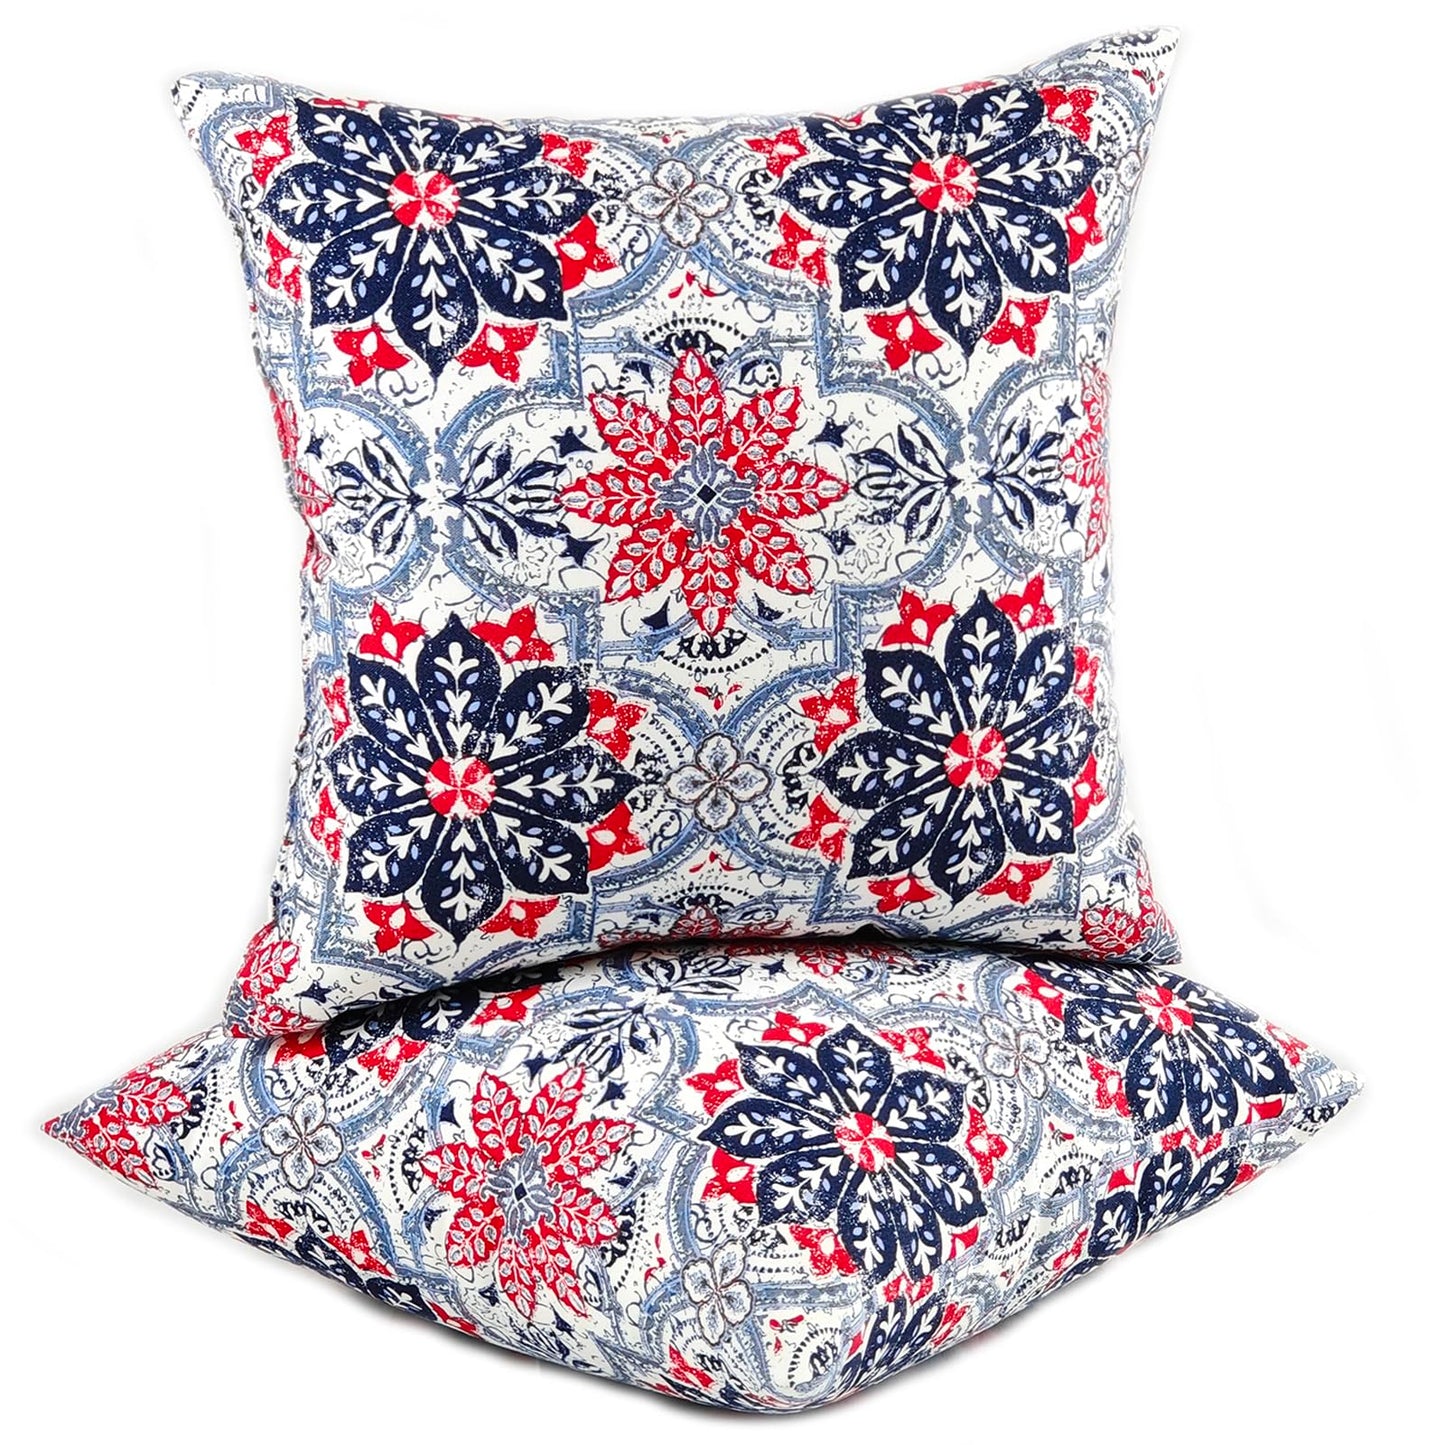 JMGBird Patio Pillows Outdoor Waterproof Set of 2 Outdoor Throw Pillows with Inserts included18×18 Inch Outdoor Pillow for Patio Furniture